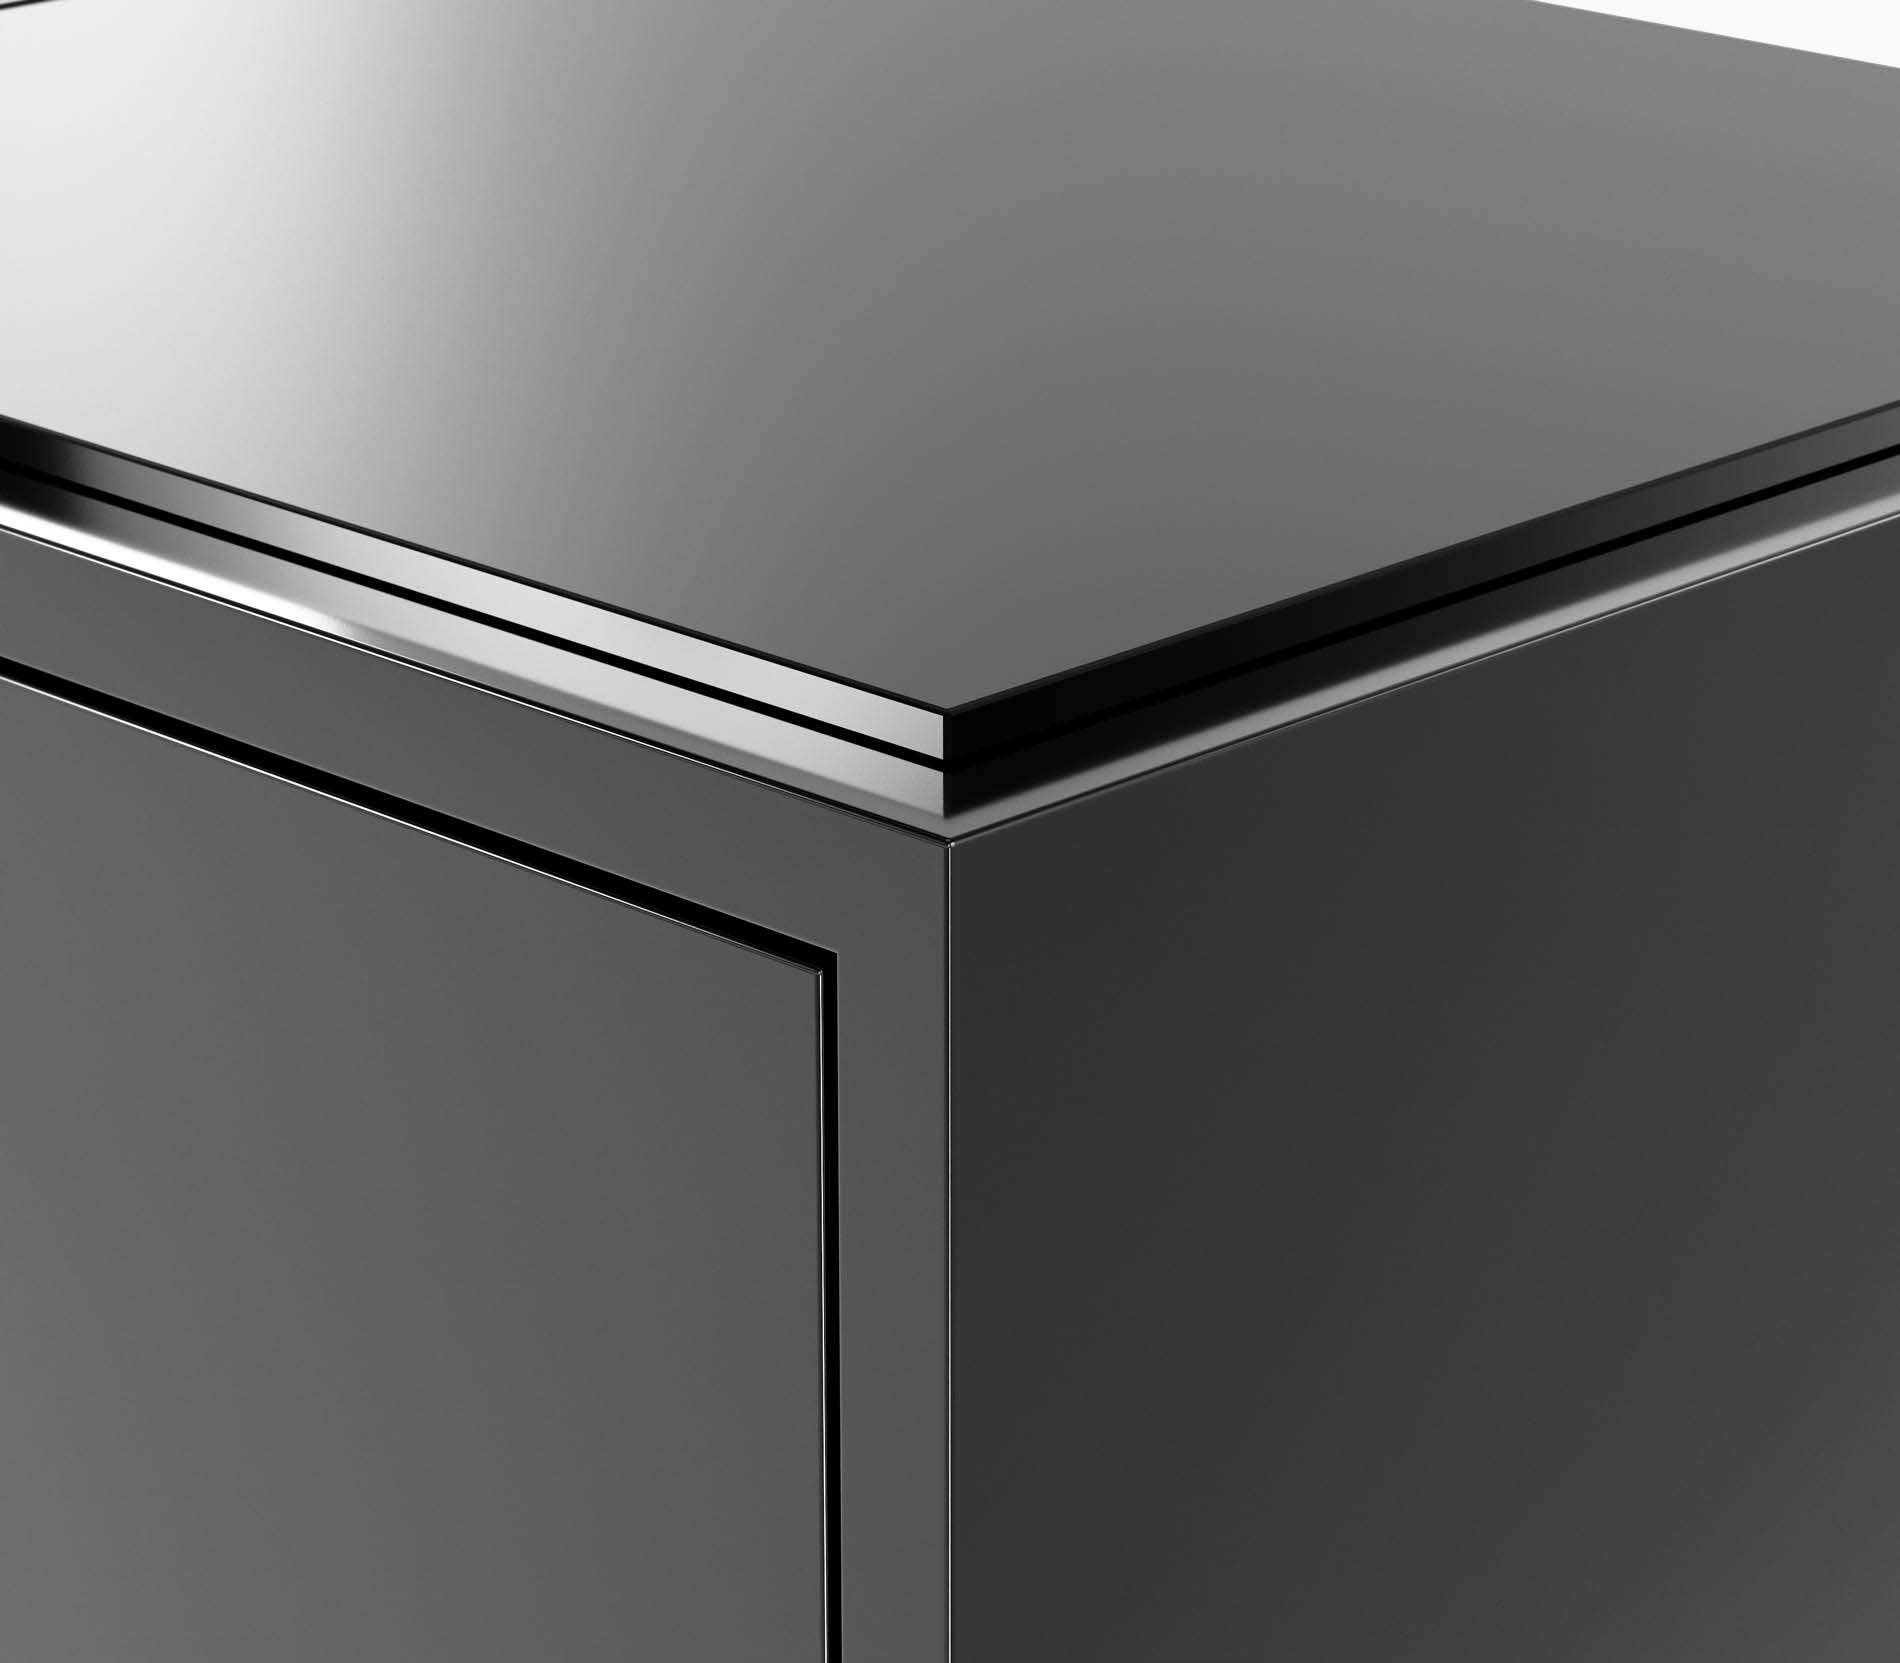 Edge detail of a Highline Credenza in black polyester with a clear black back painted glass top